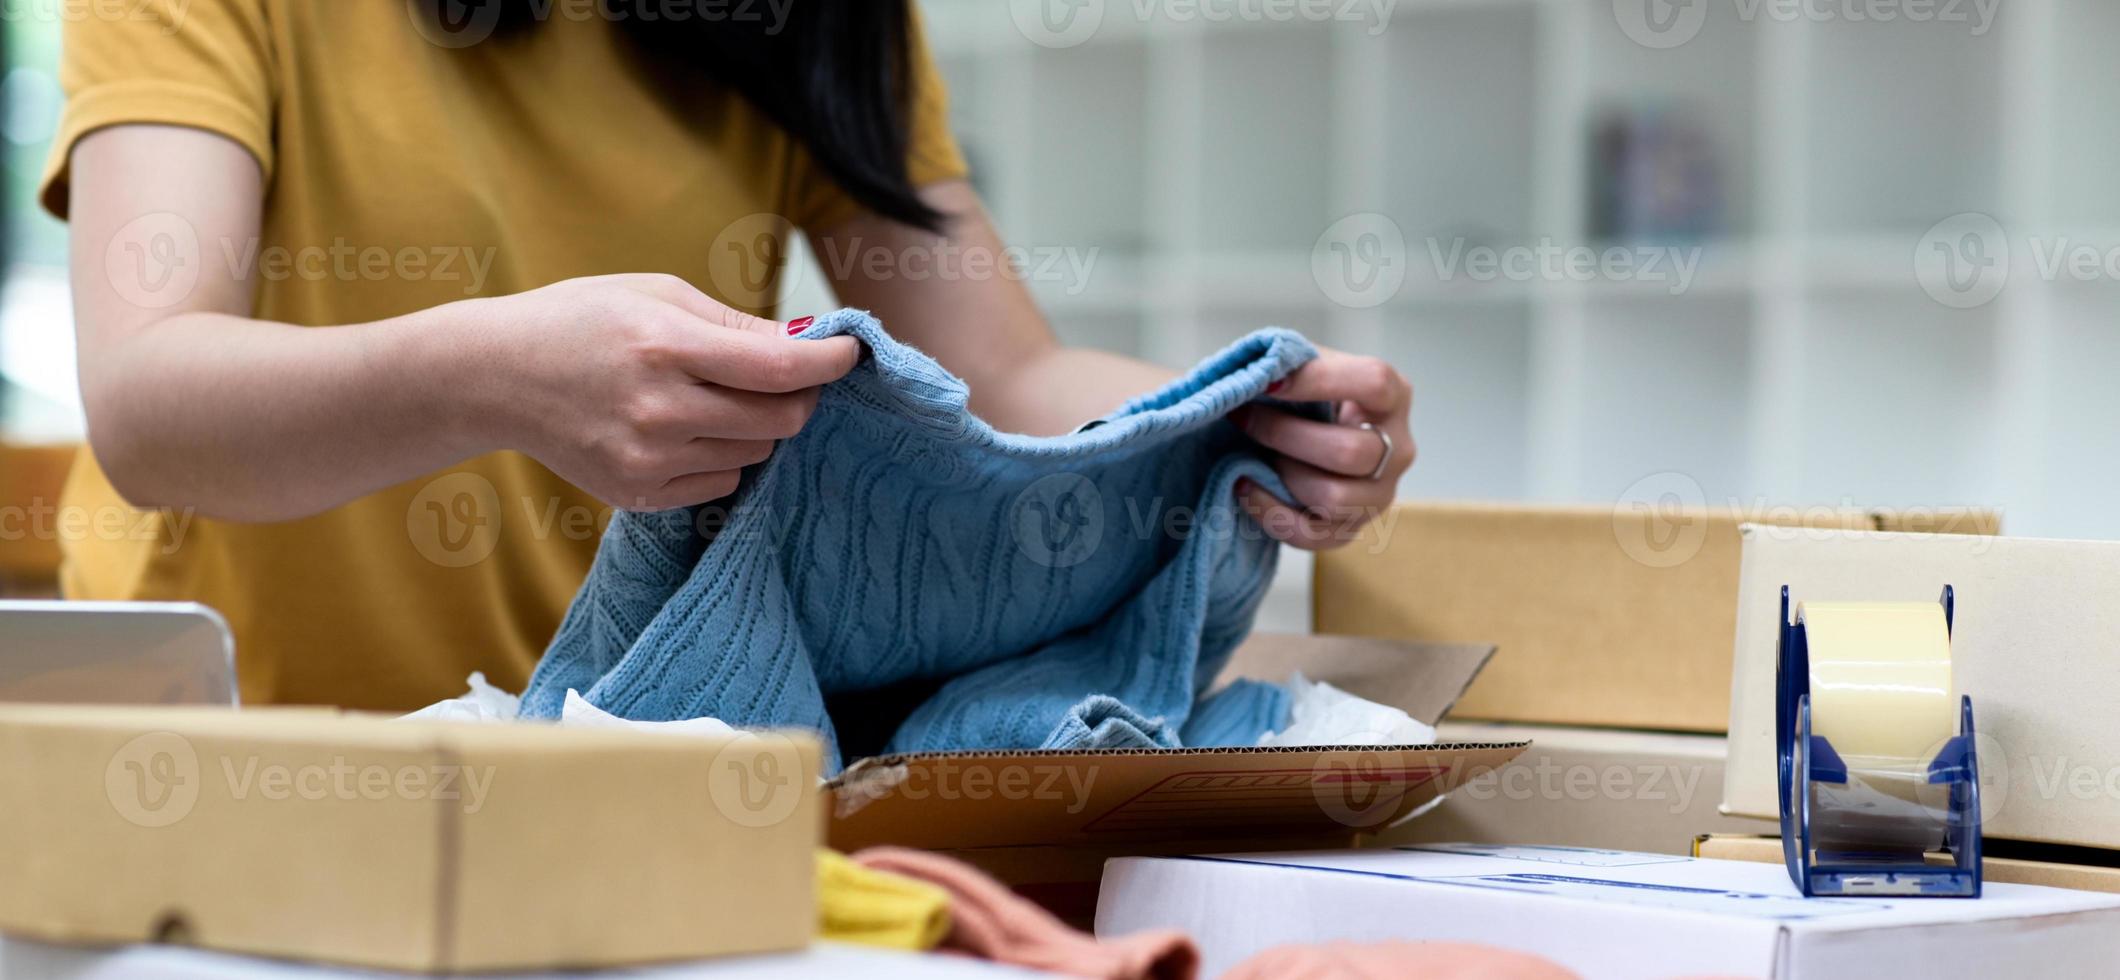 Online sellers are checking knit sweaters before packing them for shipping. photo